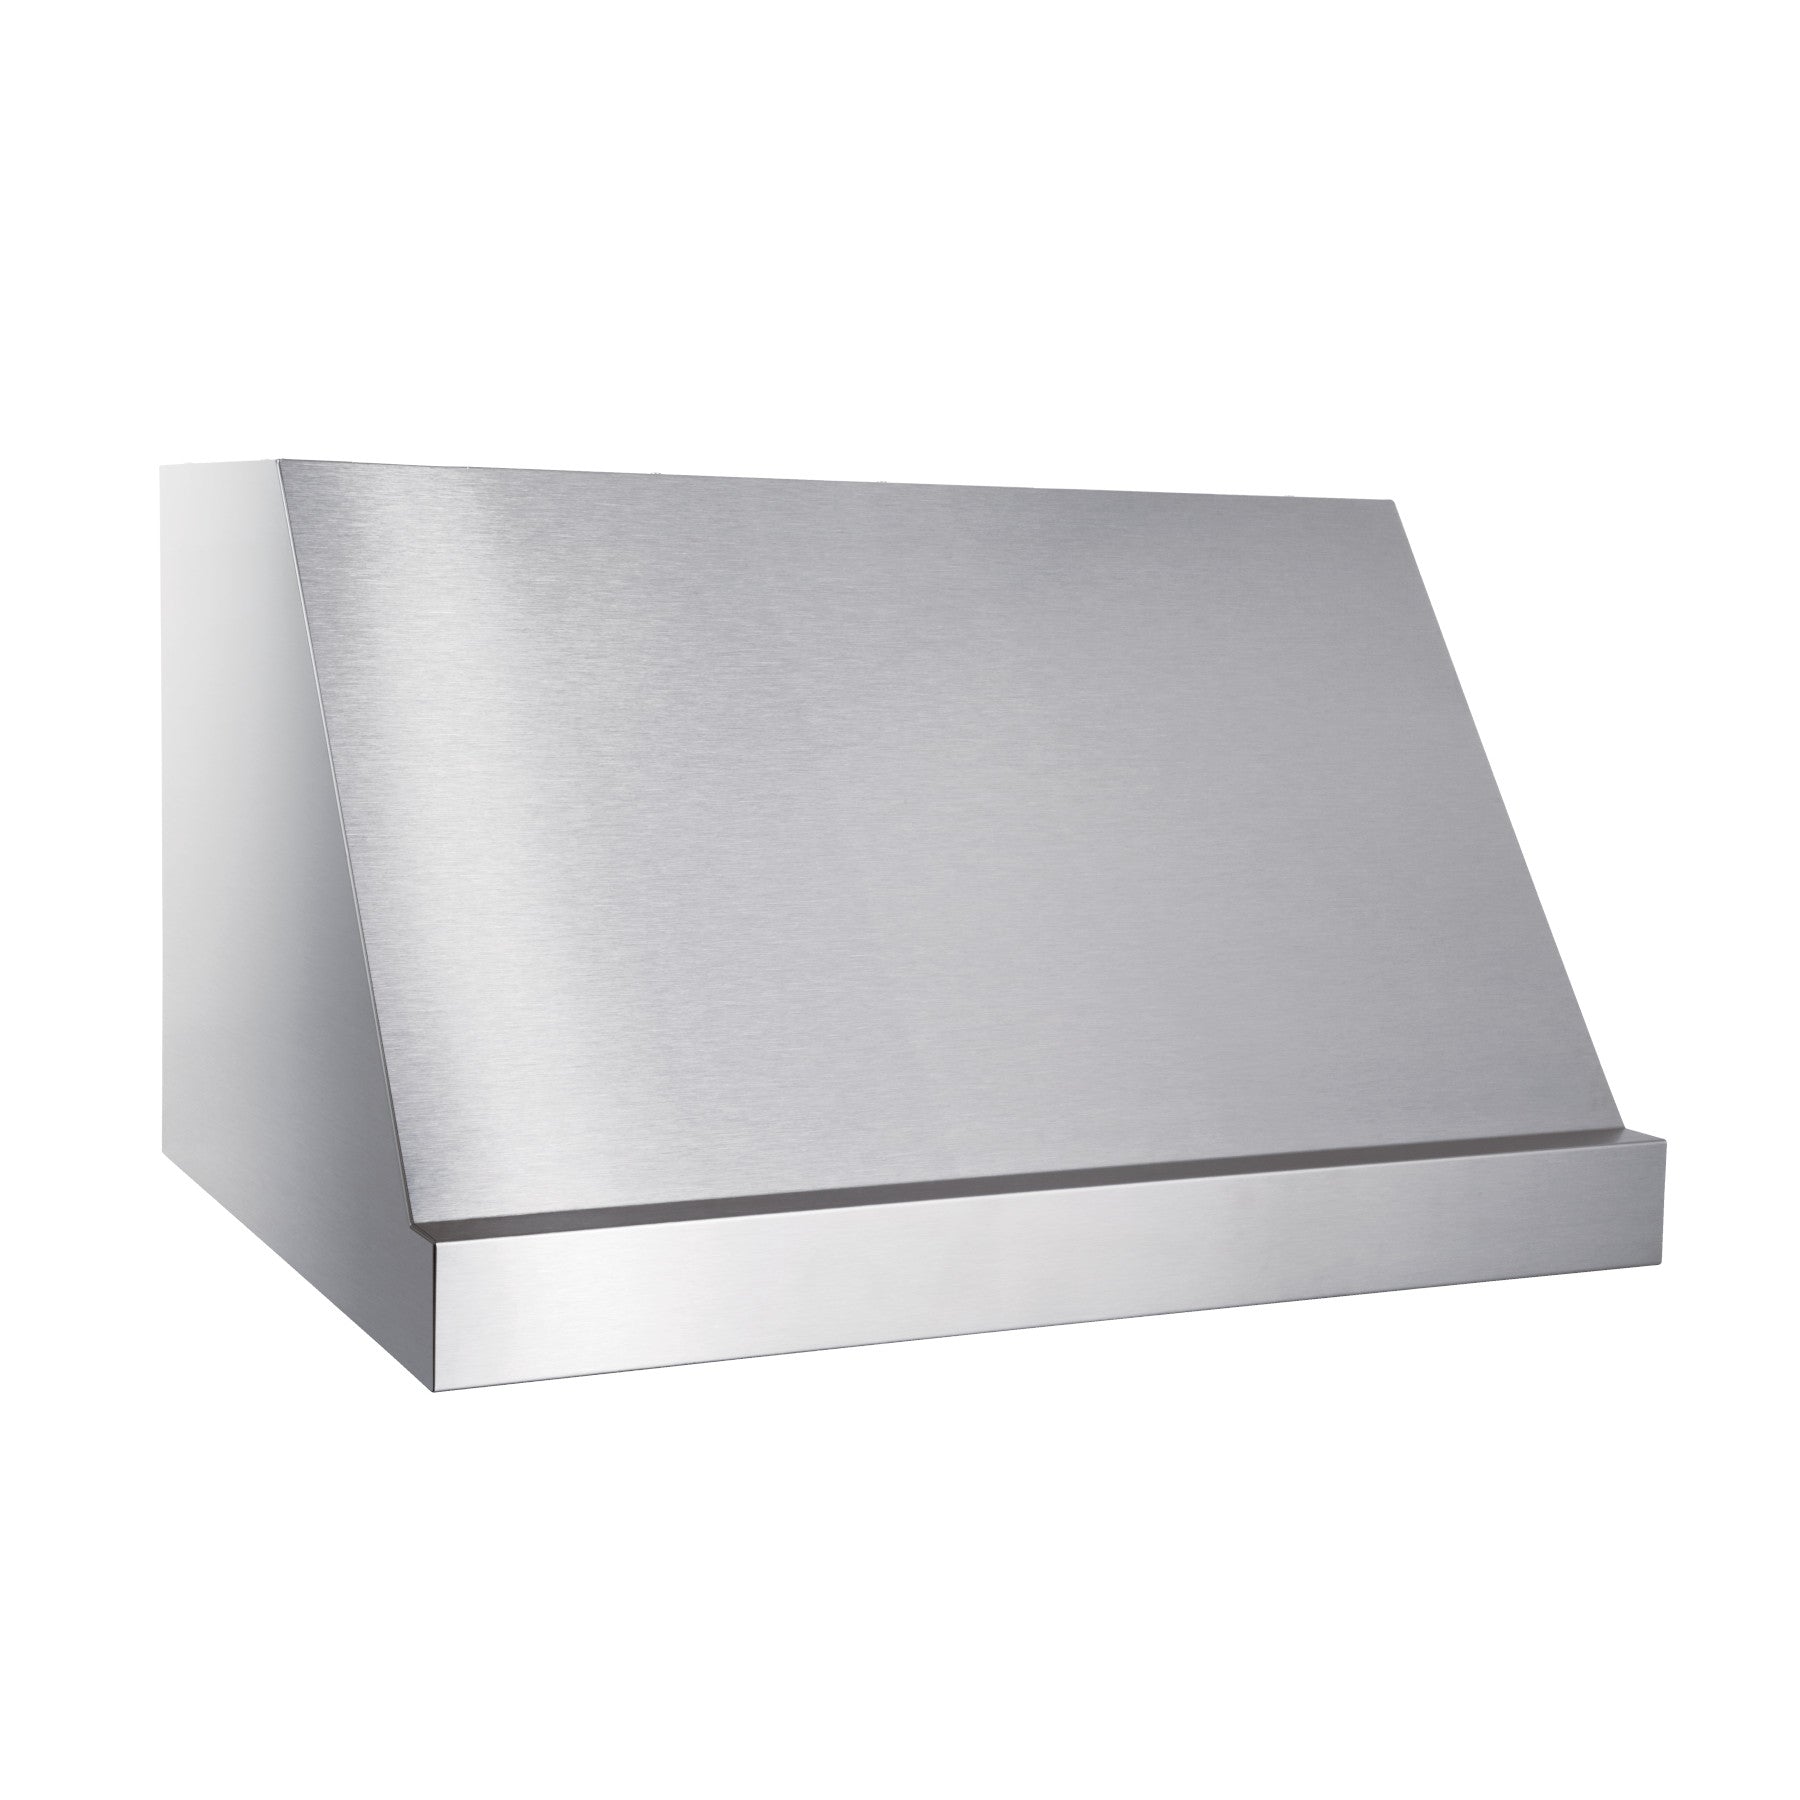 Best - 54 Inch Wall Mount and Chimney Range Vent in Stainless - WP28M54SB